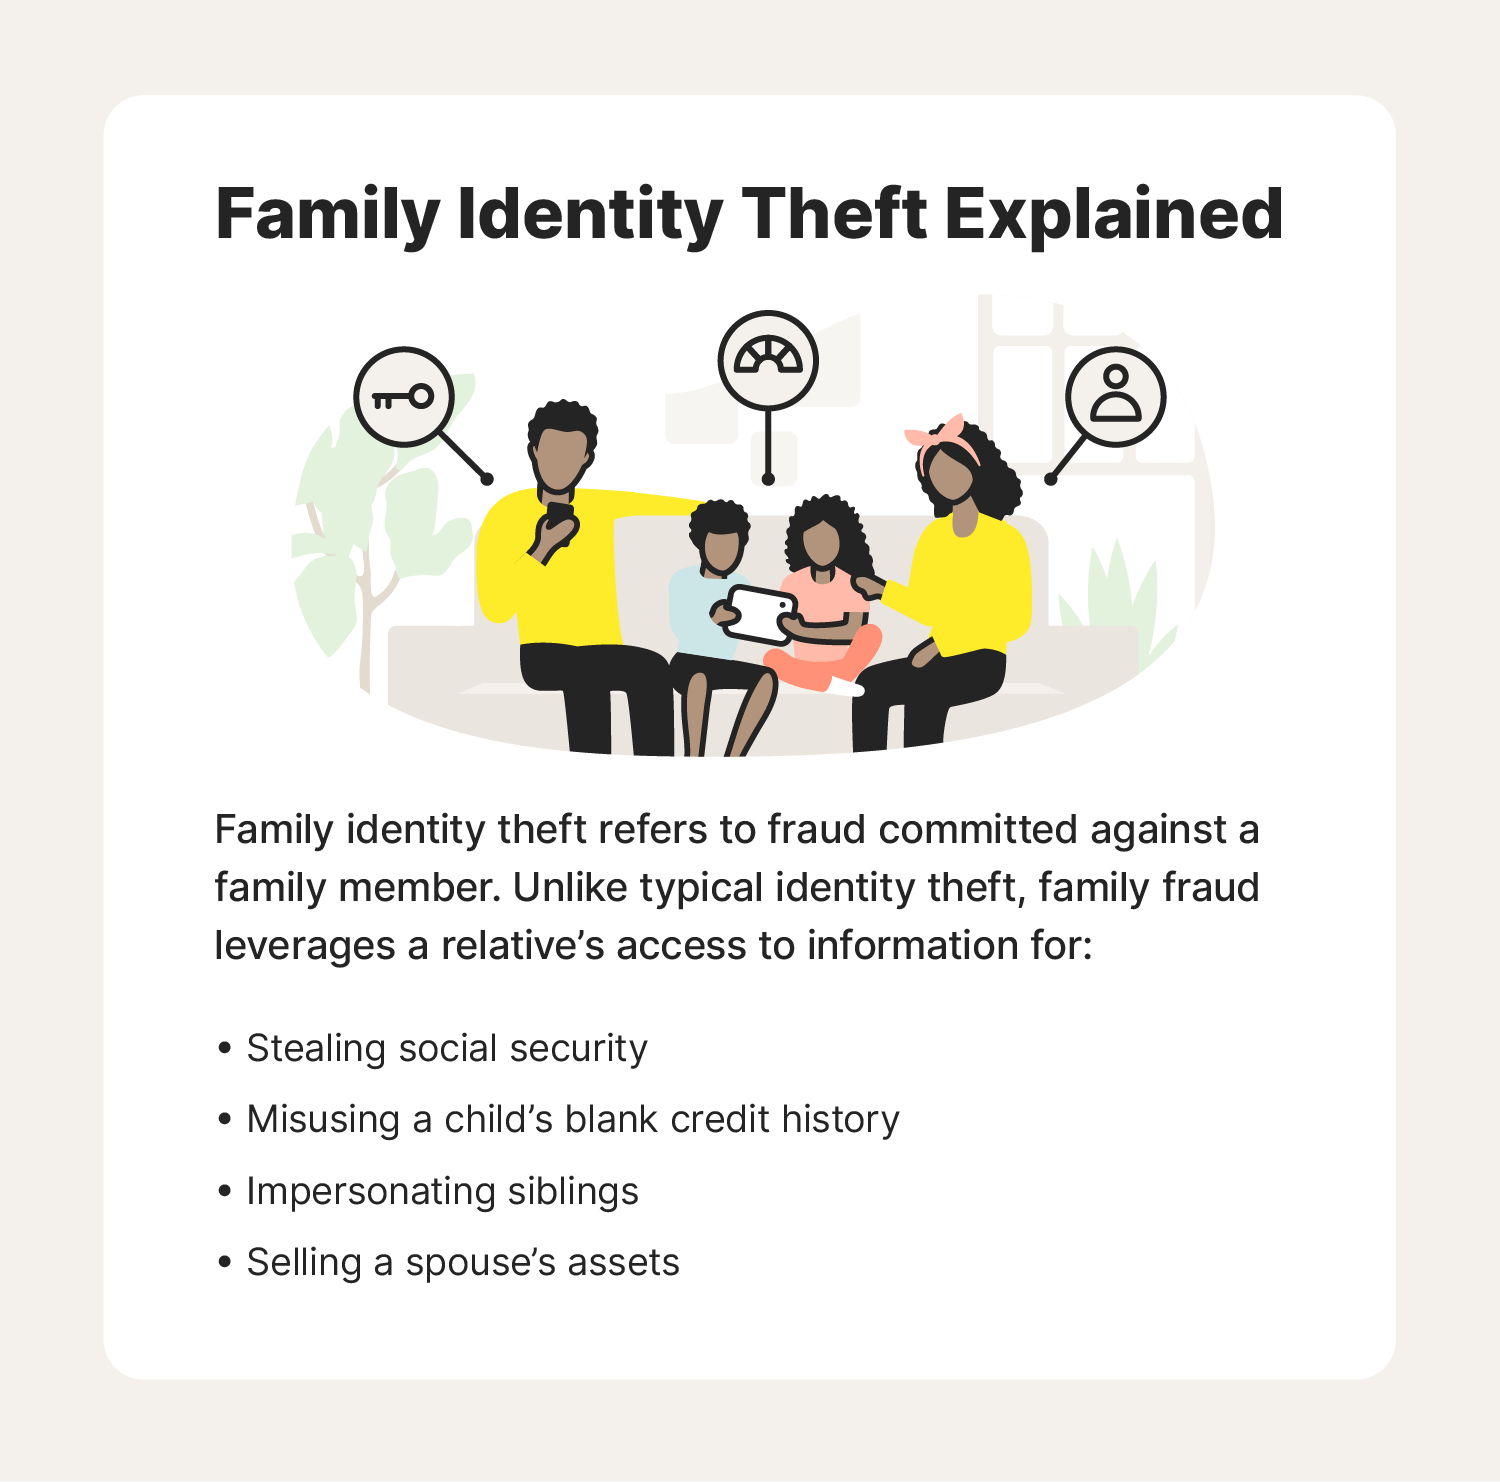 A graphic defining family identity theft and providing examples of it.